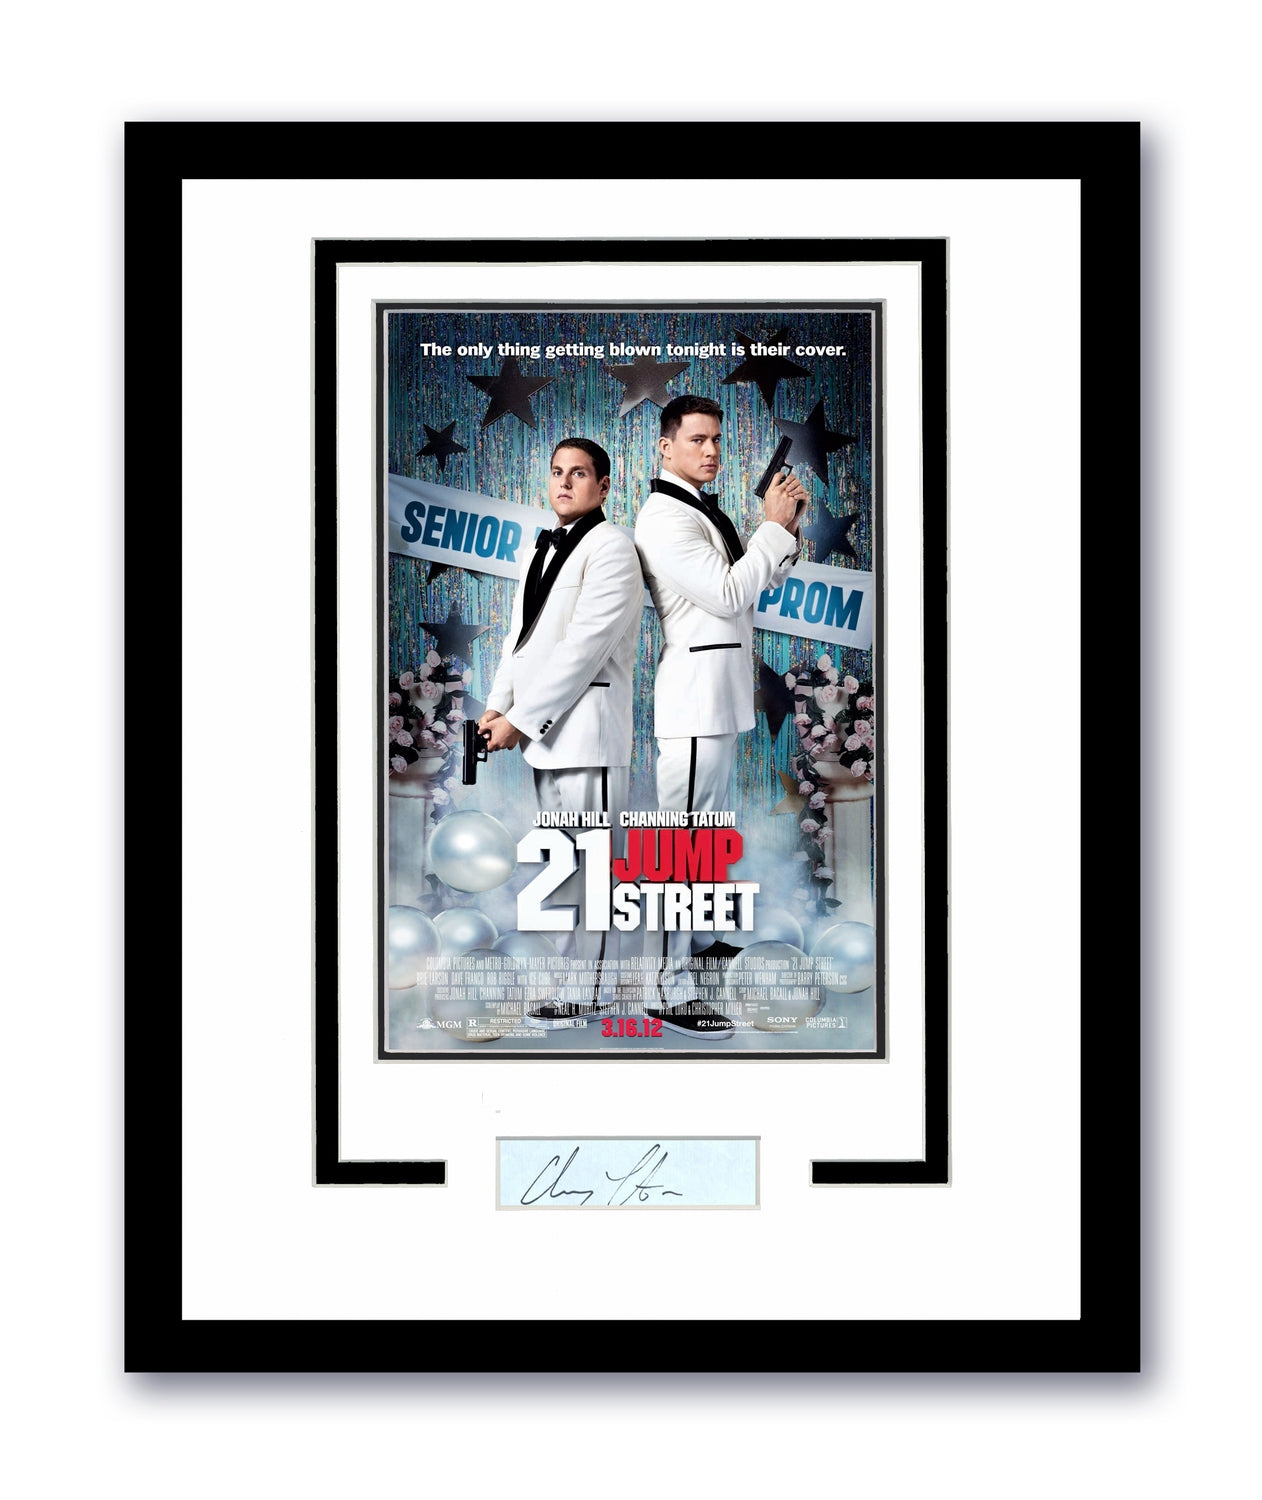 21 Jump Street Channing Tatum Autographed Signed 11x14 Framed Poster Photo ACOA 3